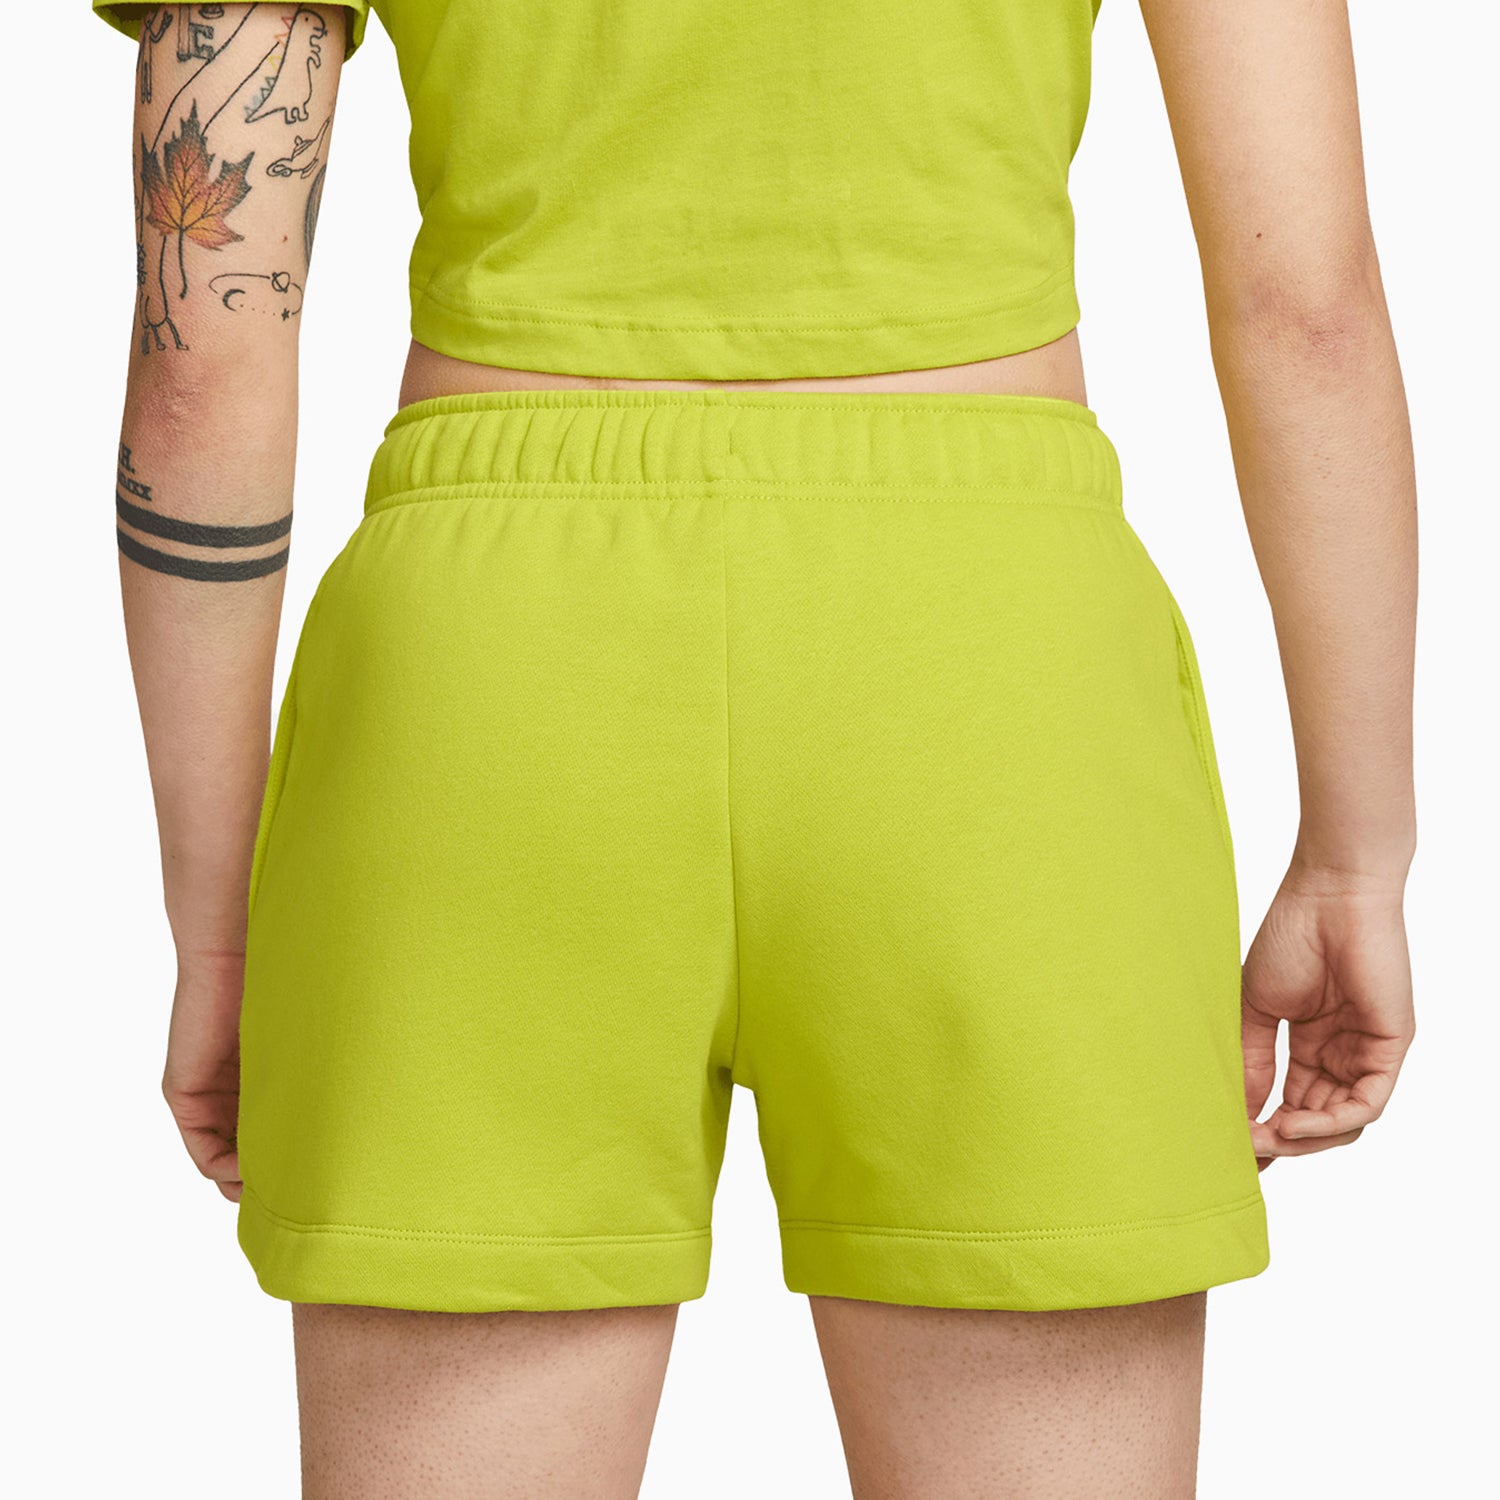 womens-nike-sportswear-club-essentials-t-shirt-and-shorts-outfit-dx7906-308-dq5802-308